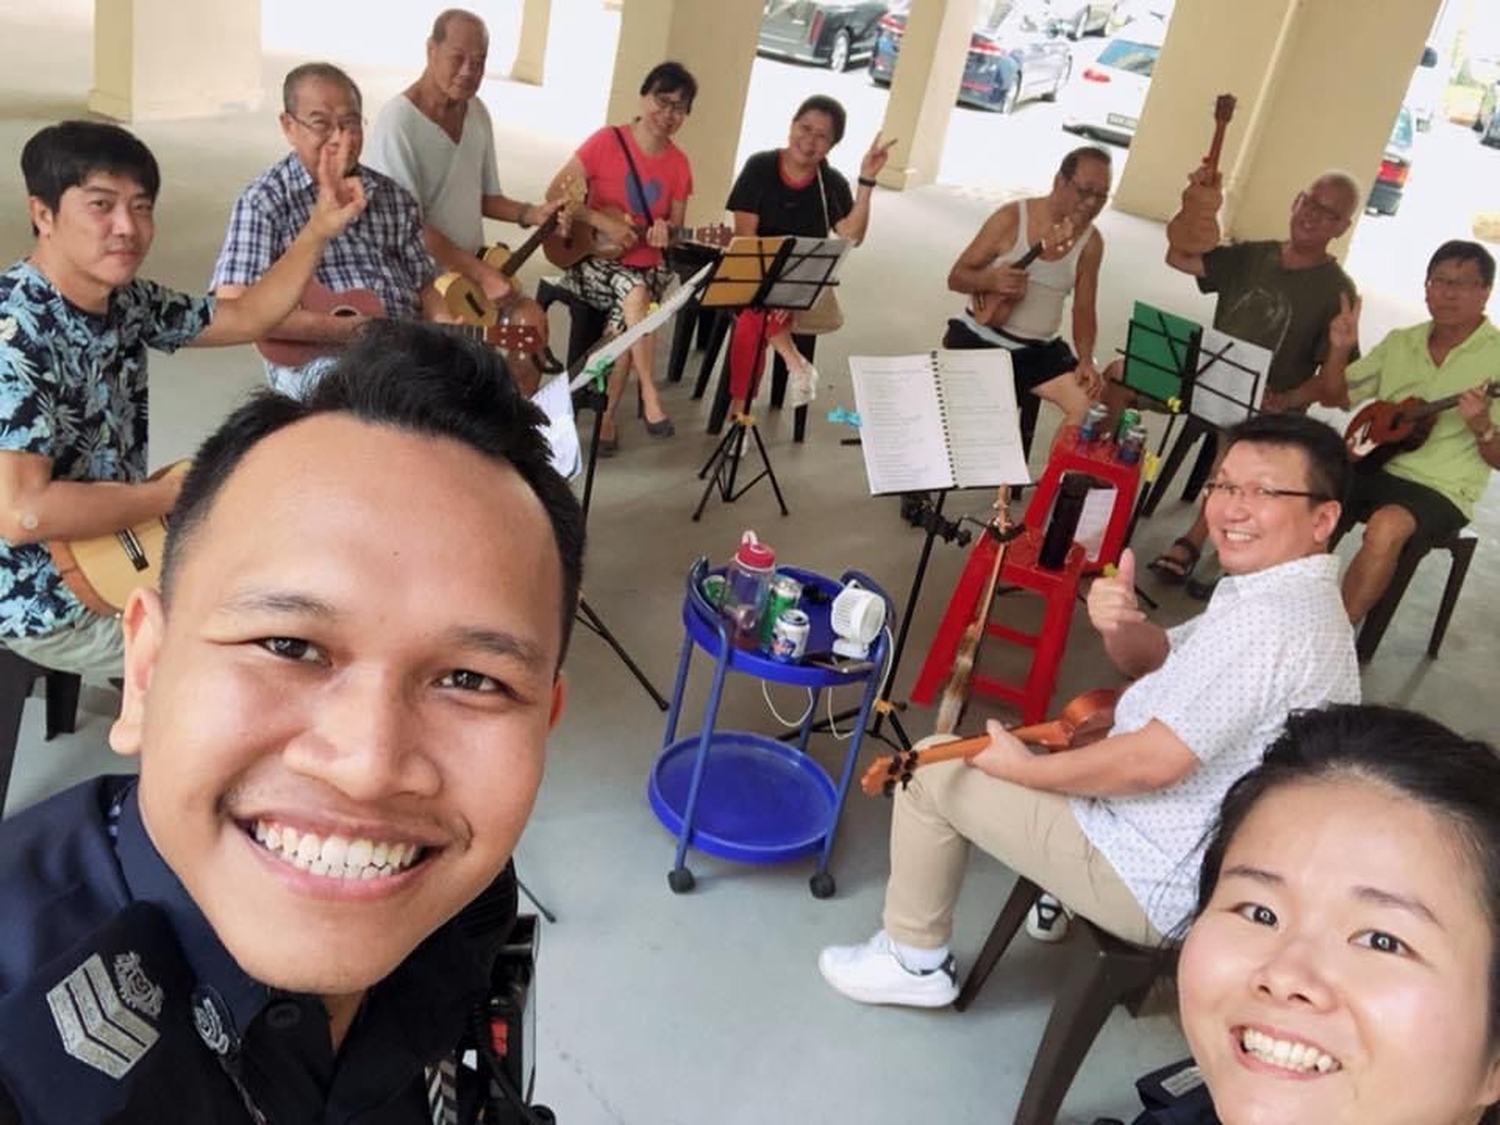 sergeant sally and a malay colleague, talking a high point selfie, with a group of elderly holding musical equipment sitting in a circle and smiling fo the camera